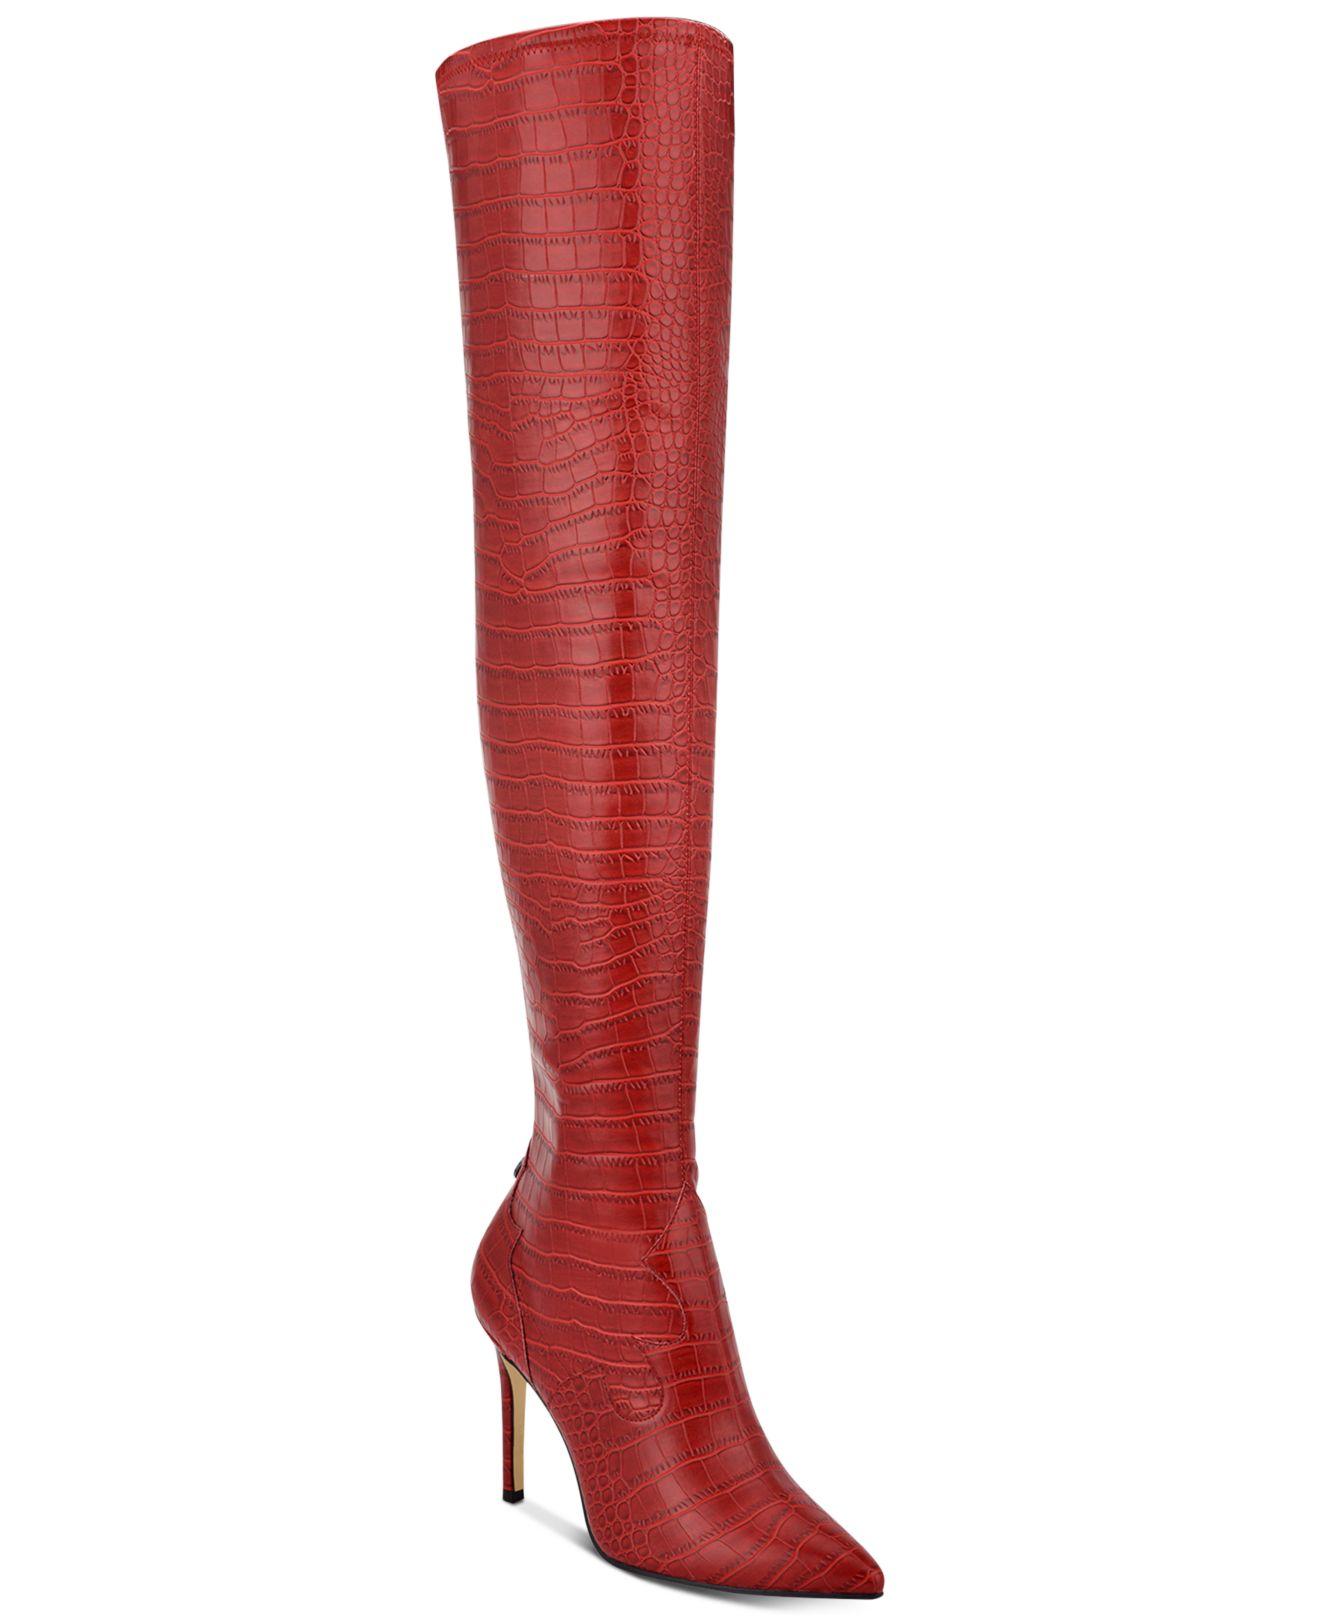 Guess Baylie Over-the-knee Boots in Dark Red Croc (Red) - Lyst